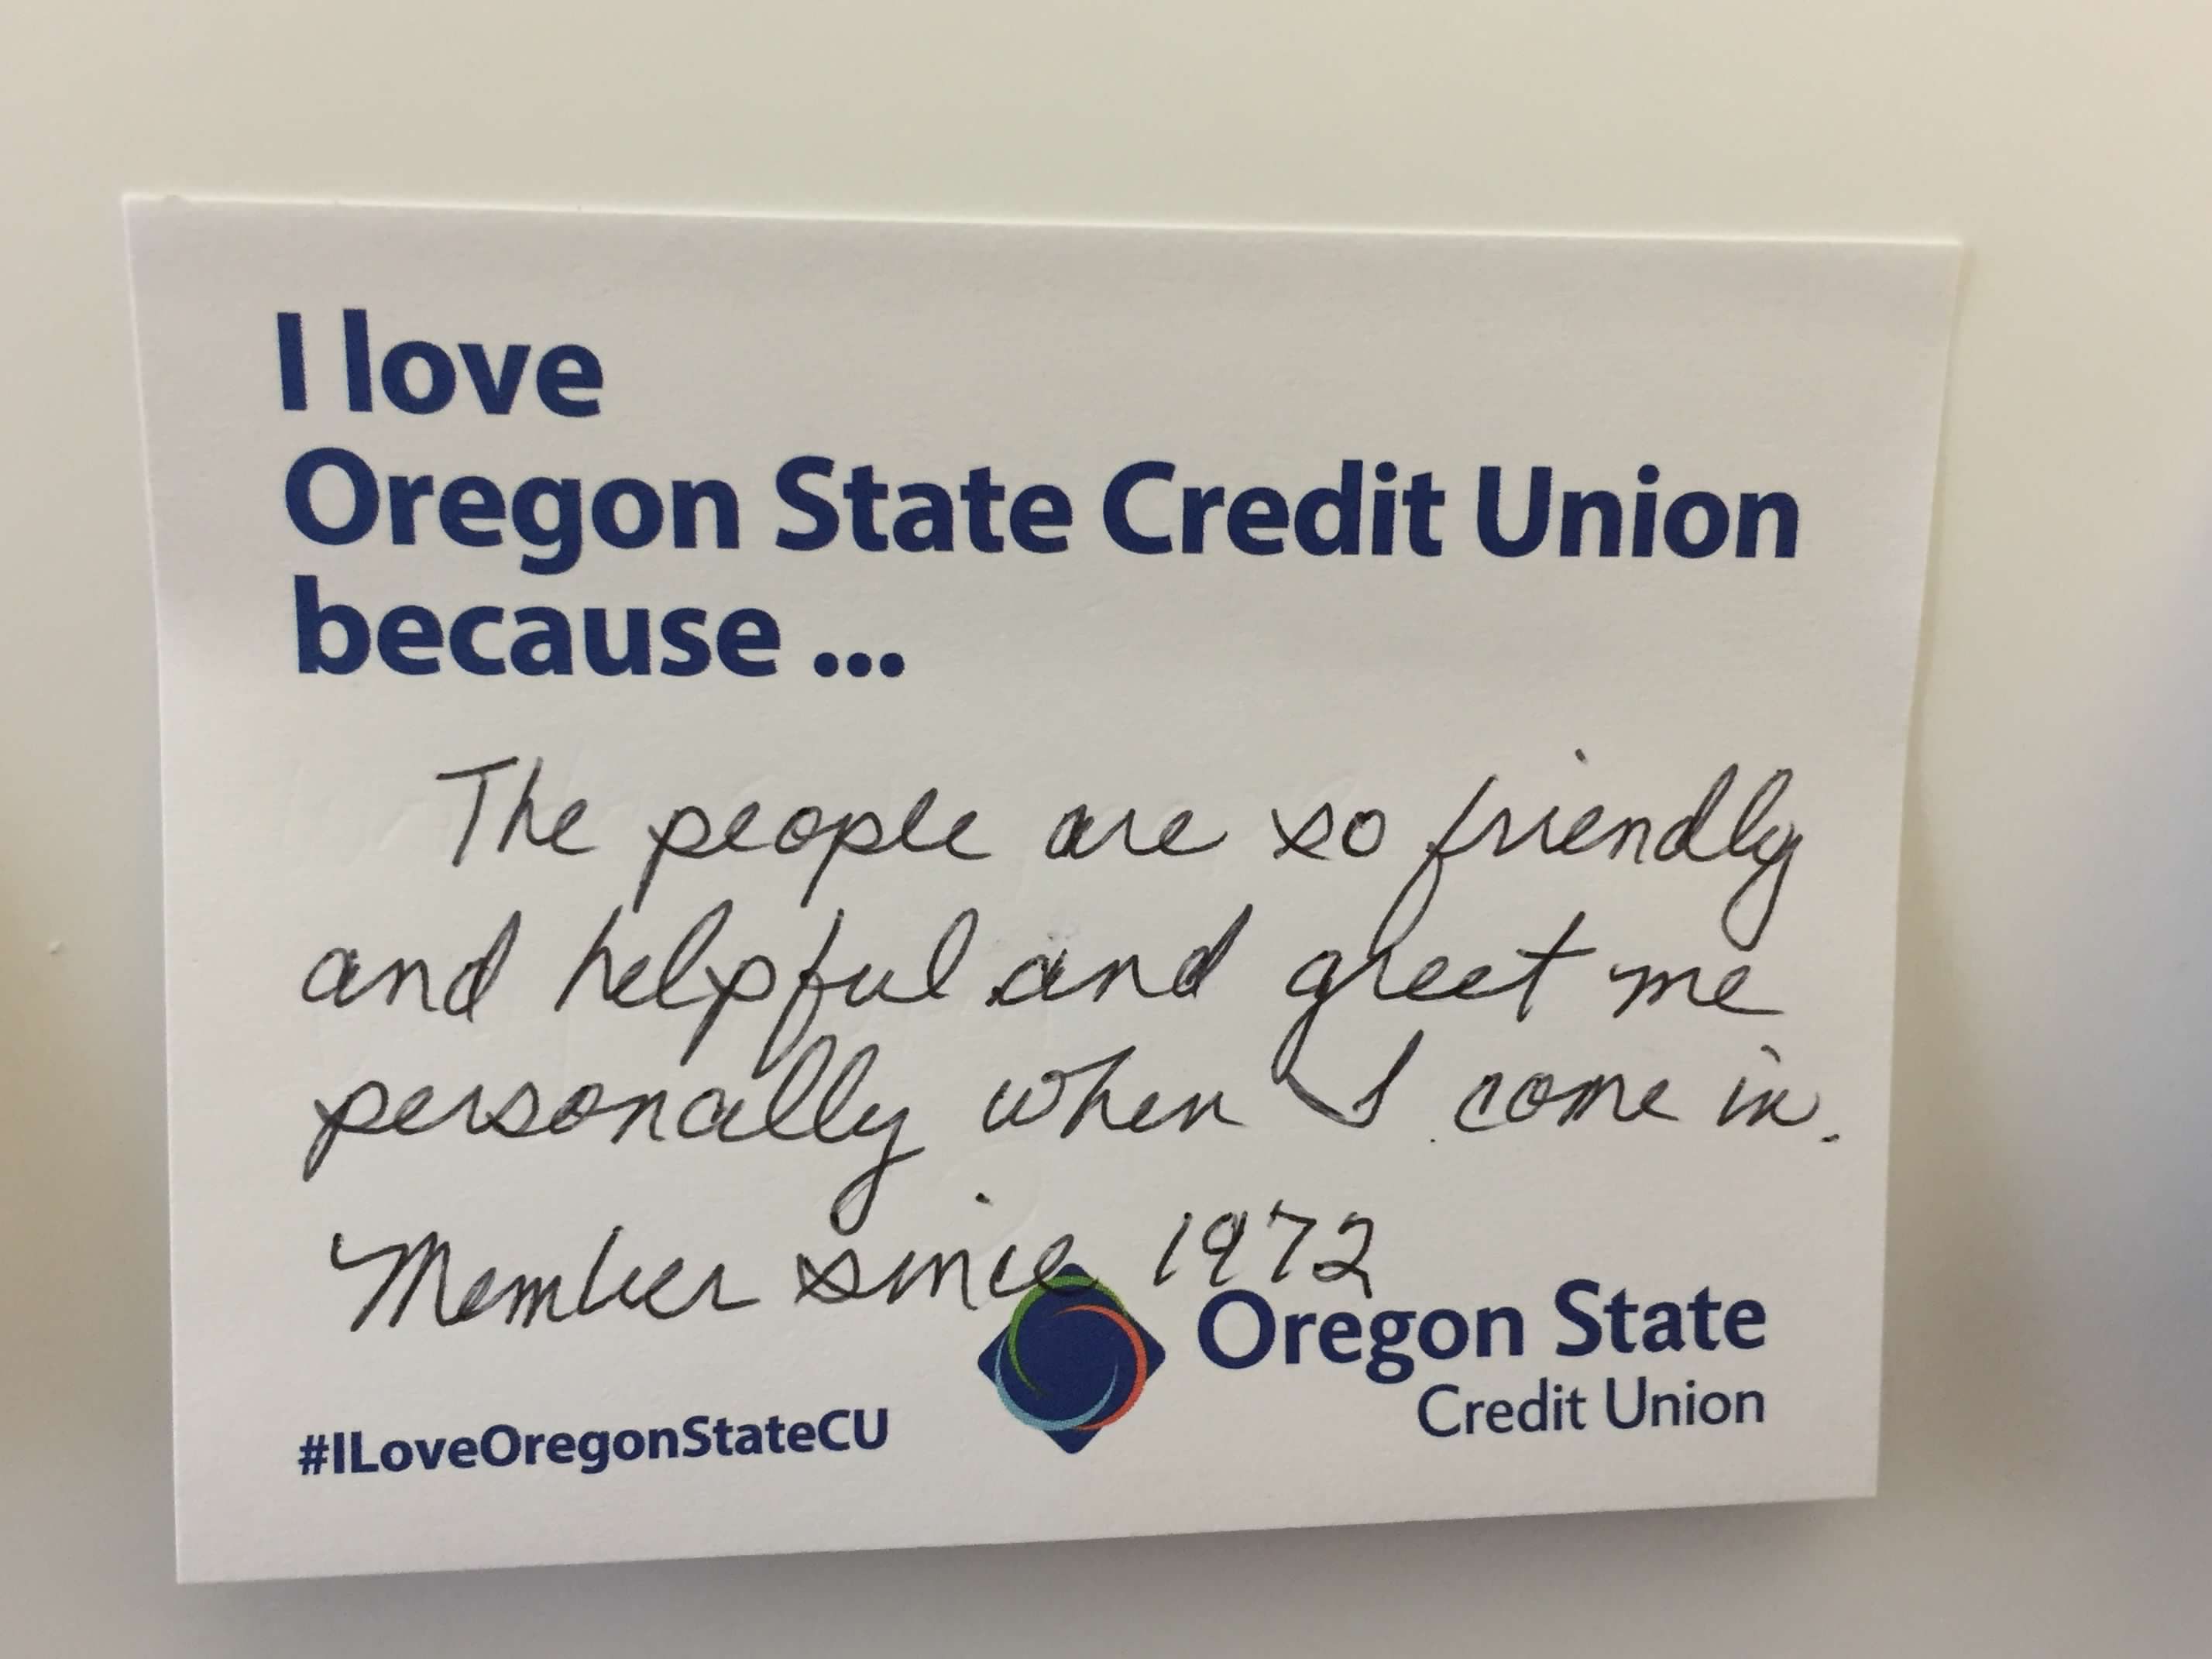 I love Oregon State Credit Union because - Member comment